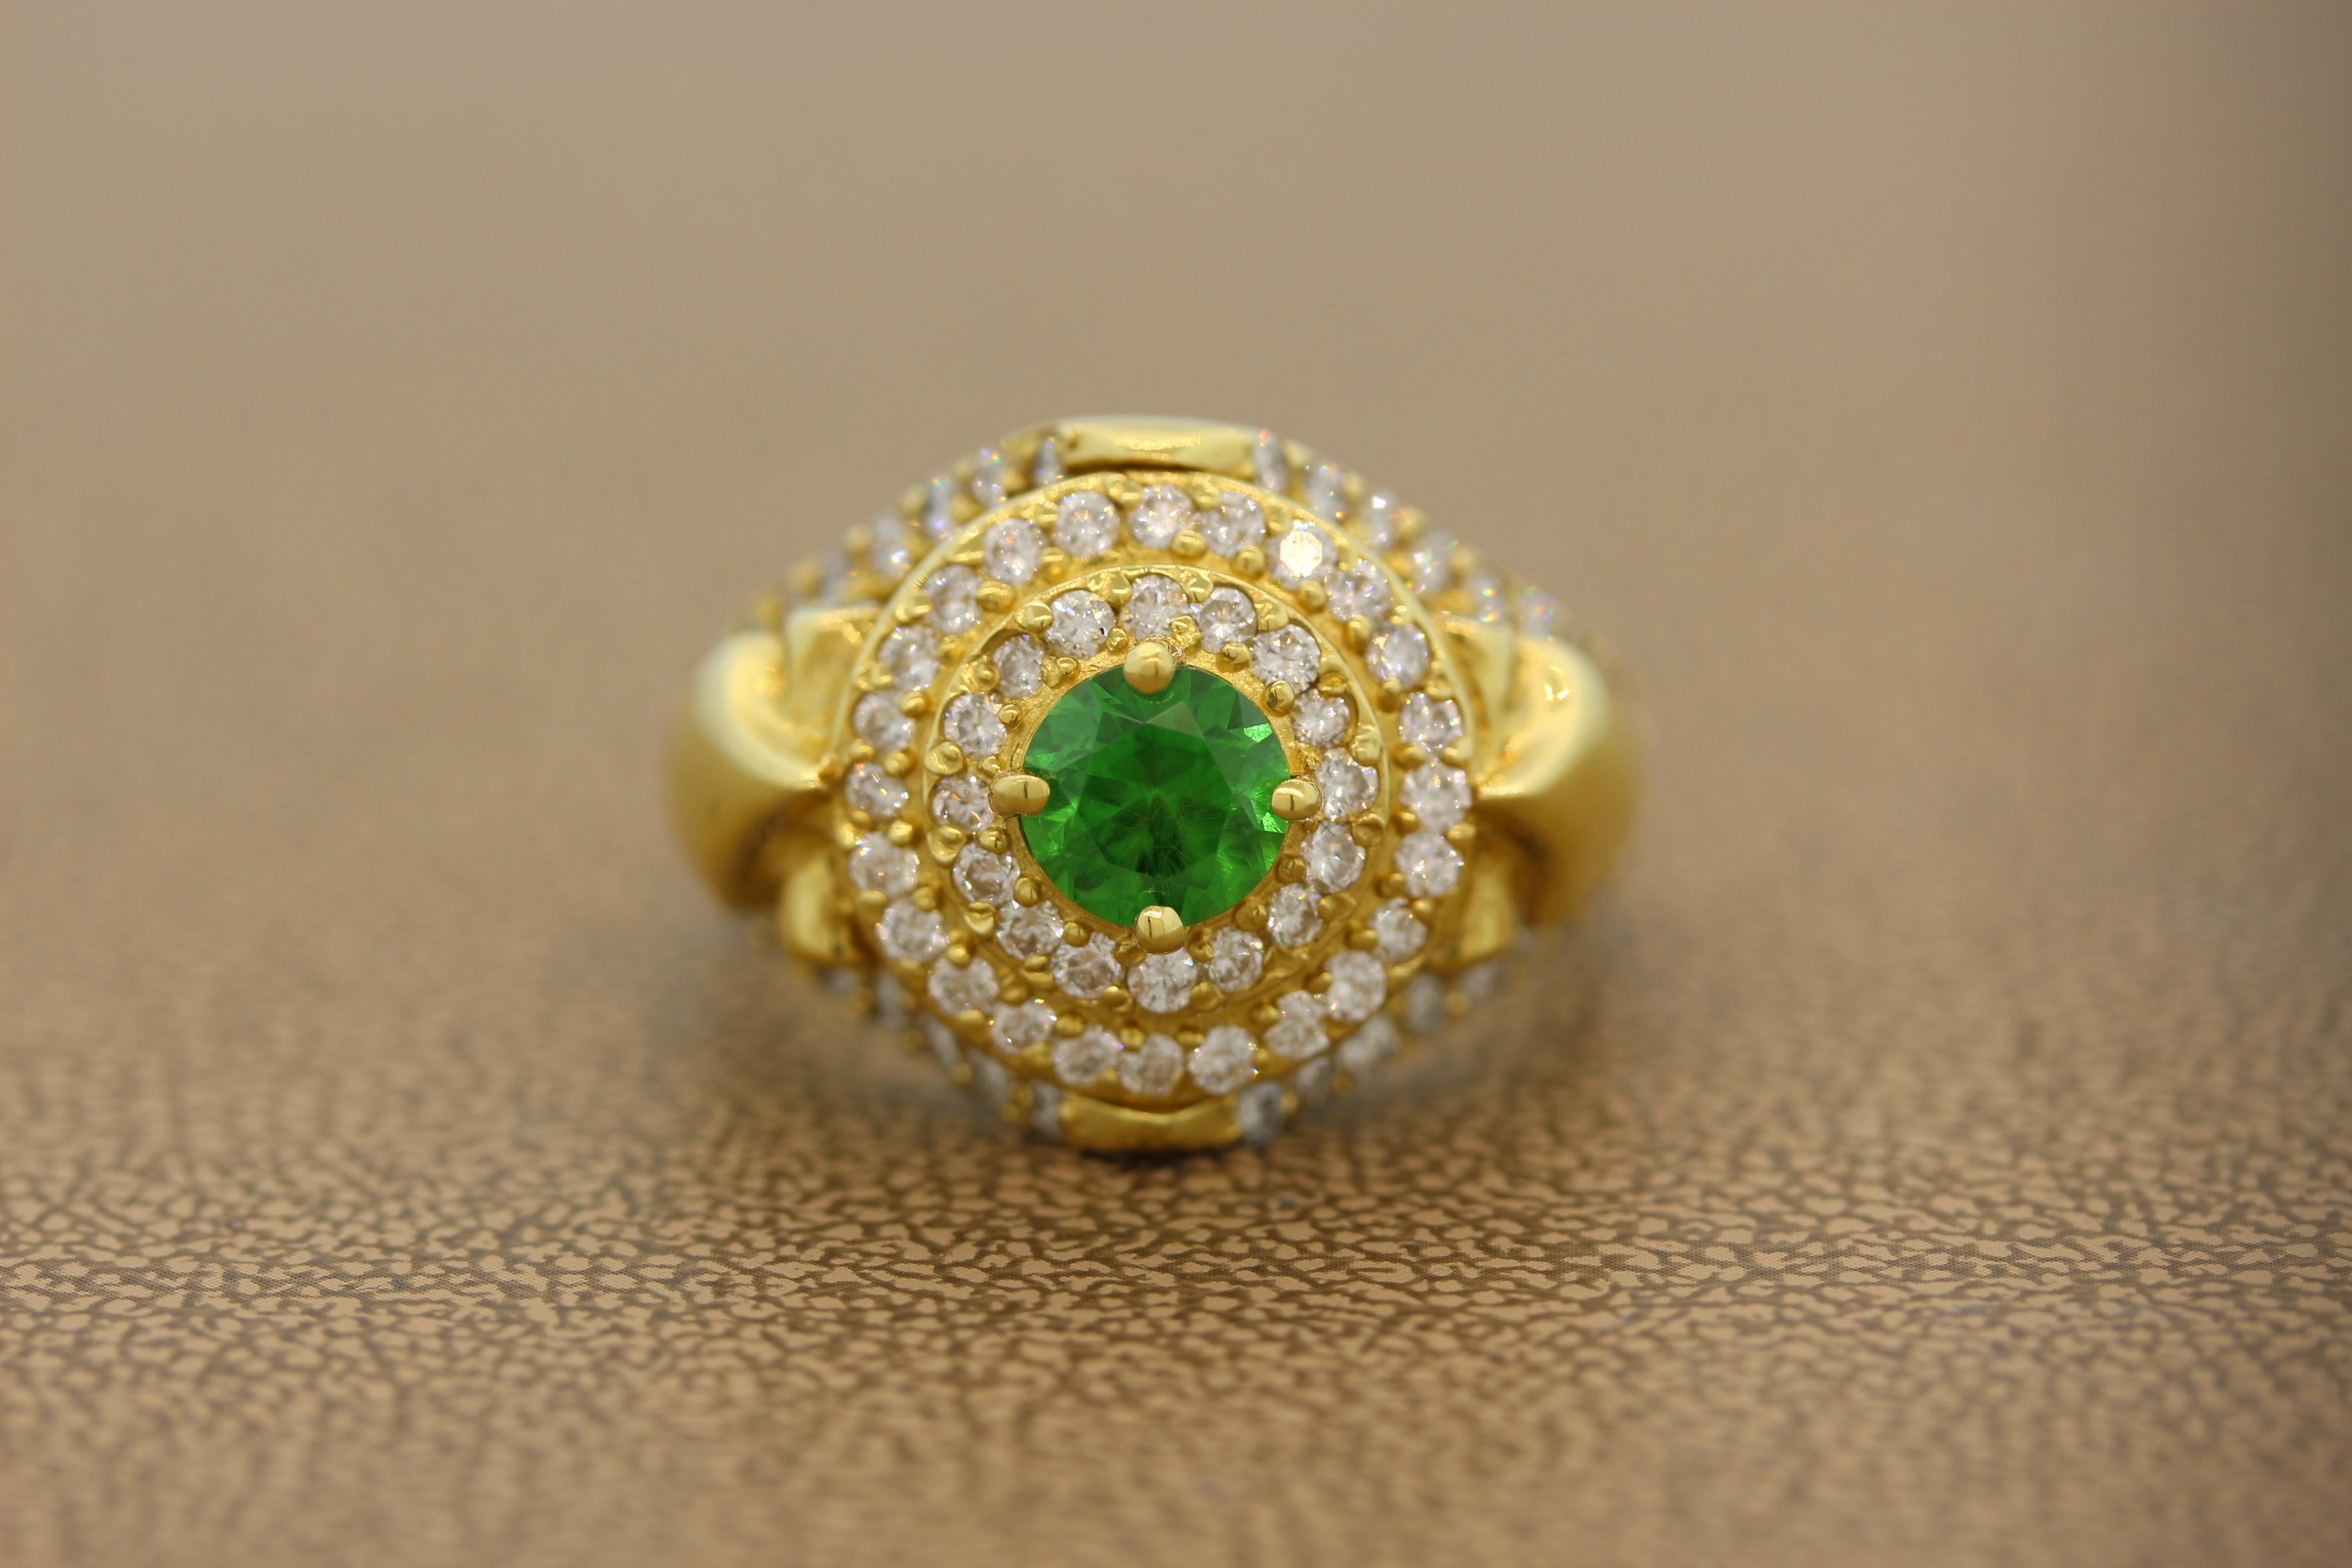 A gorgeous ring featuring an illusive demantoid garnet weighting approximately 1.50 carats. An extremely rare gemstone, this particularly demantoid has a perfect horsetail inclusion in the center of the stone with a vivid green color. The round cut